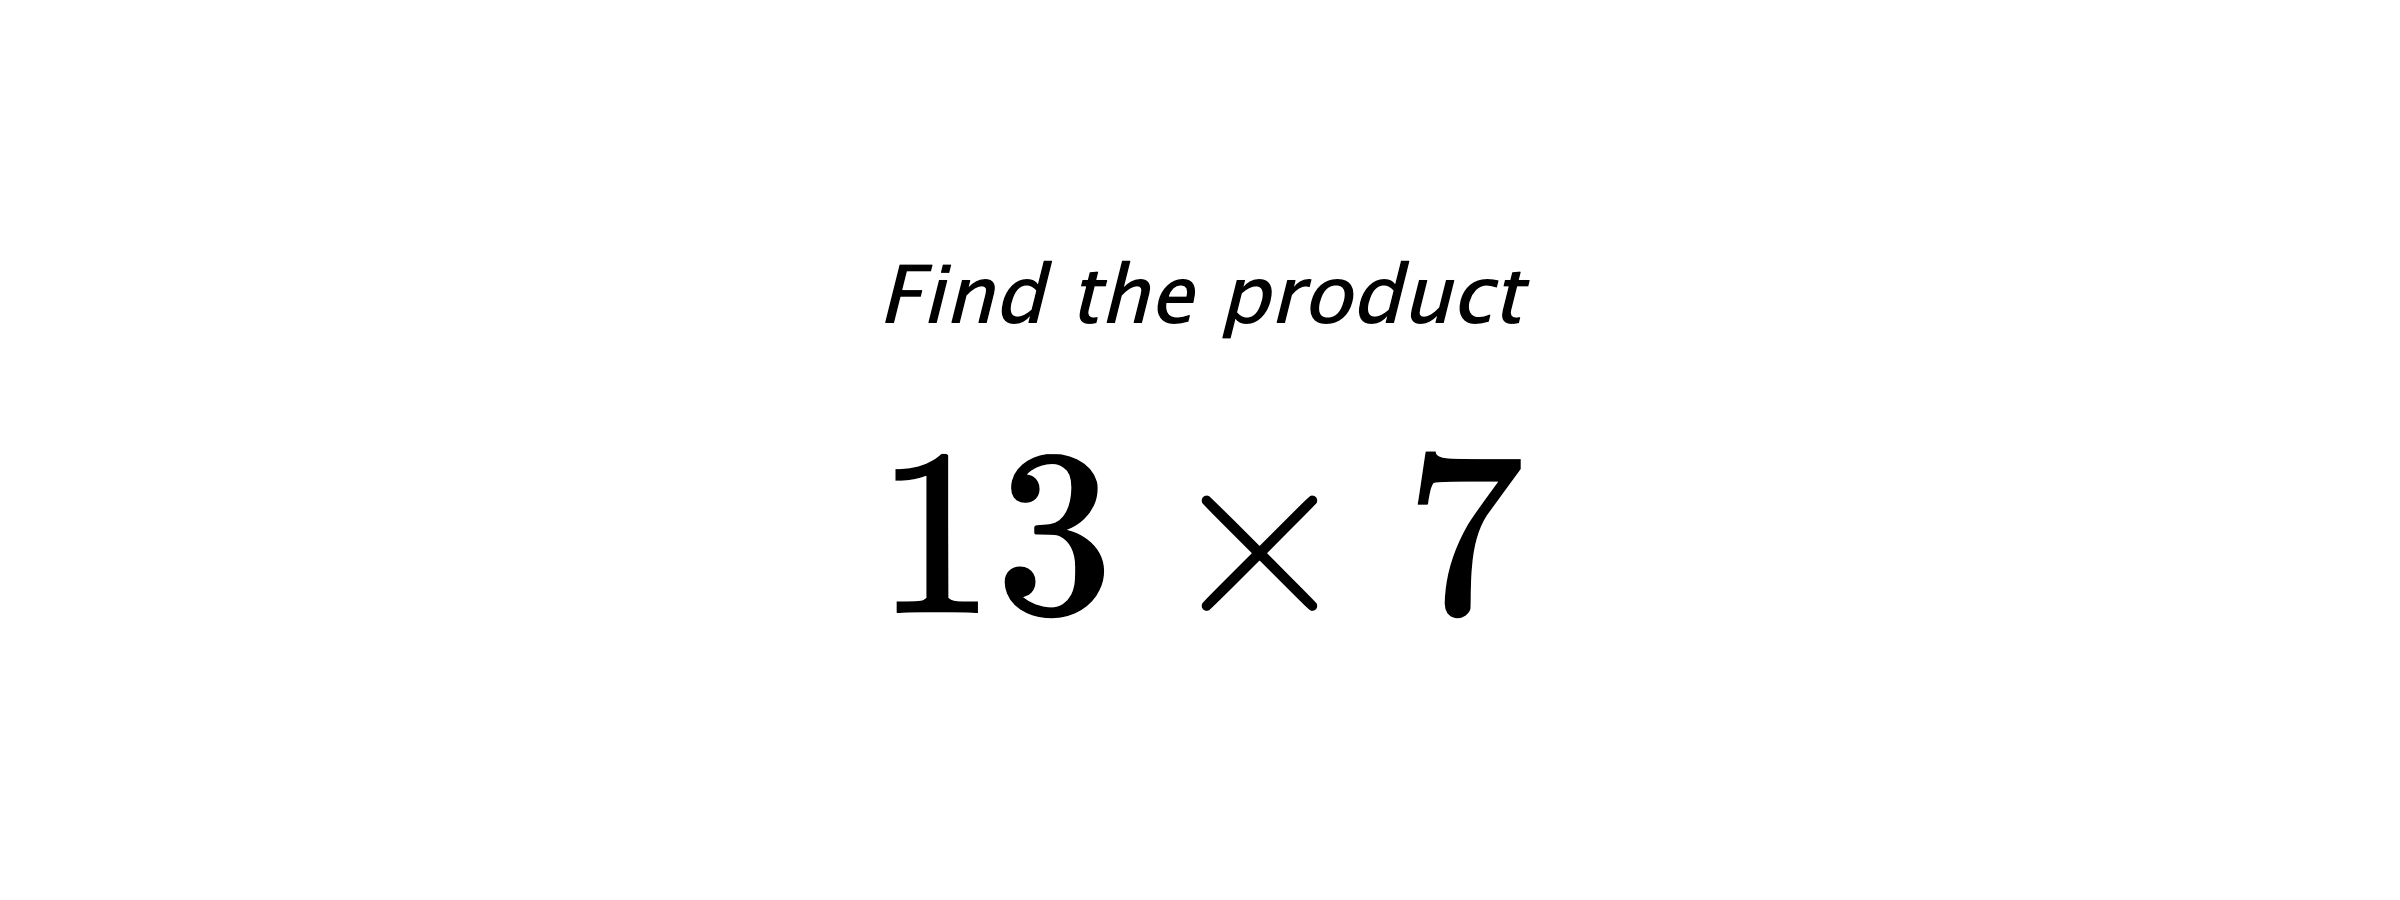 Find the product $ 13 \times 7 $